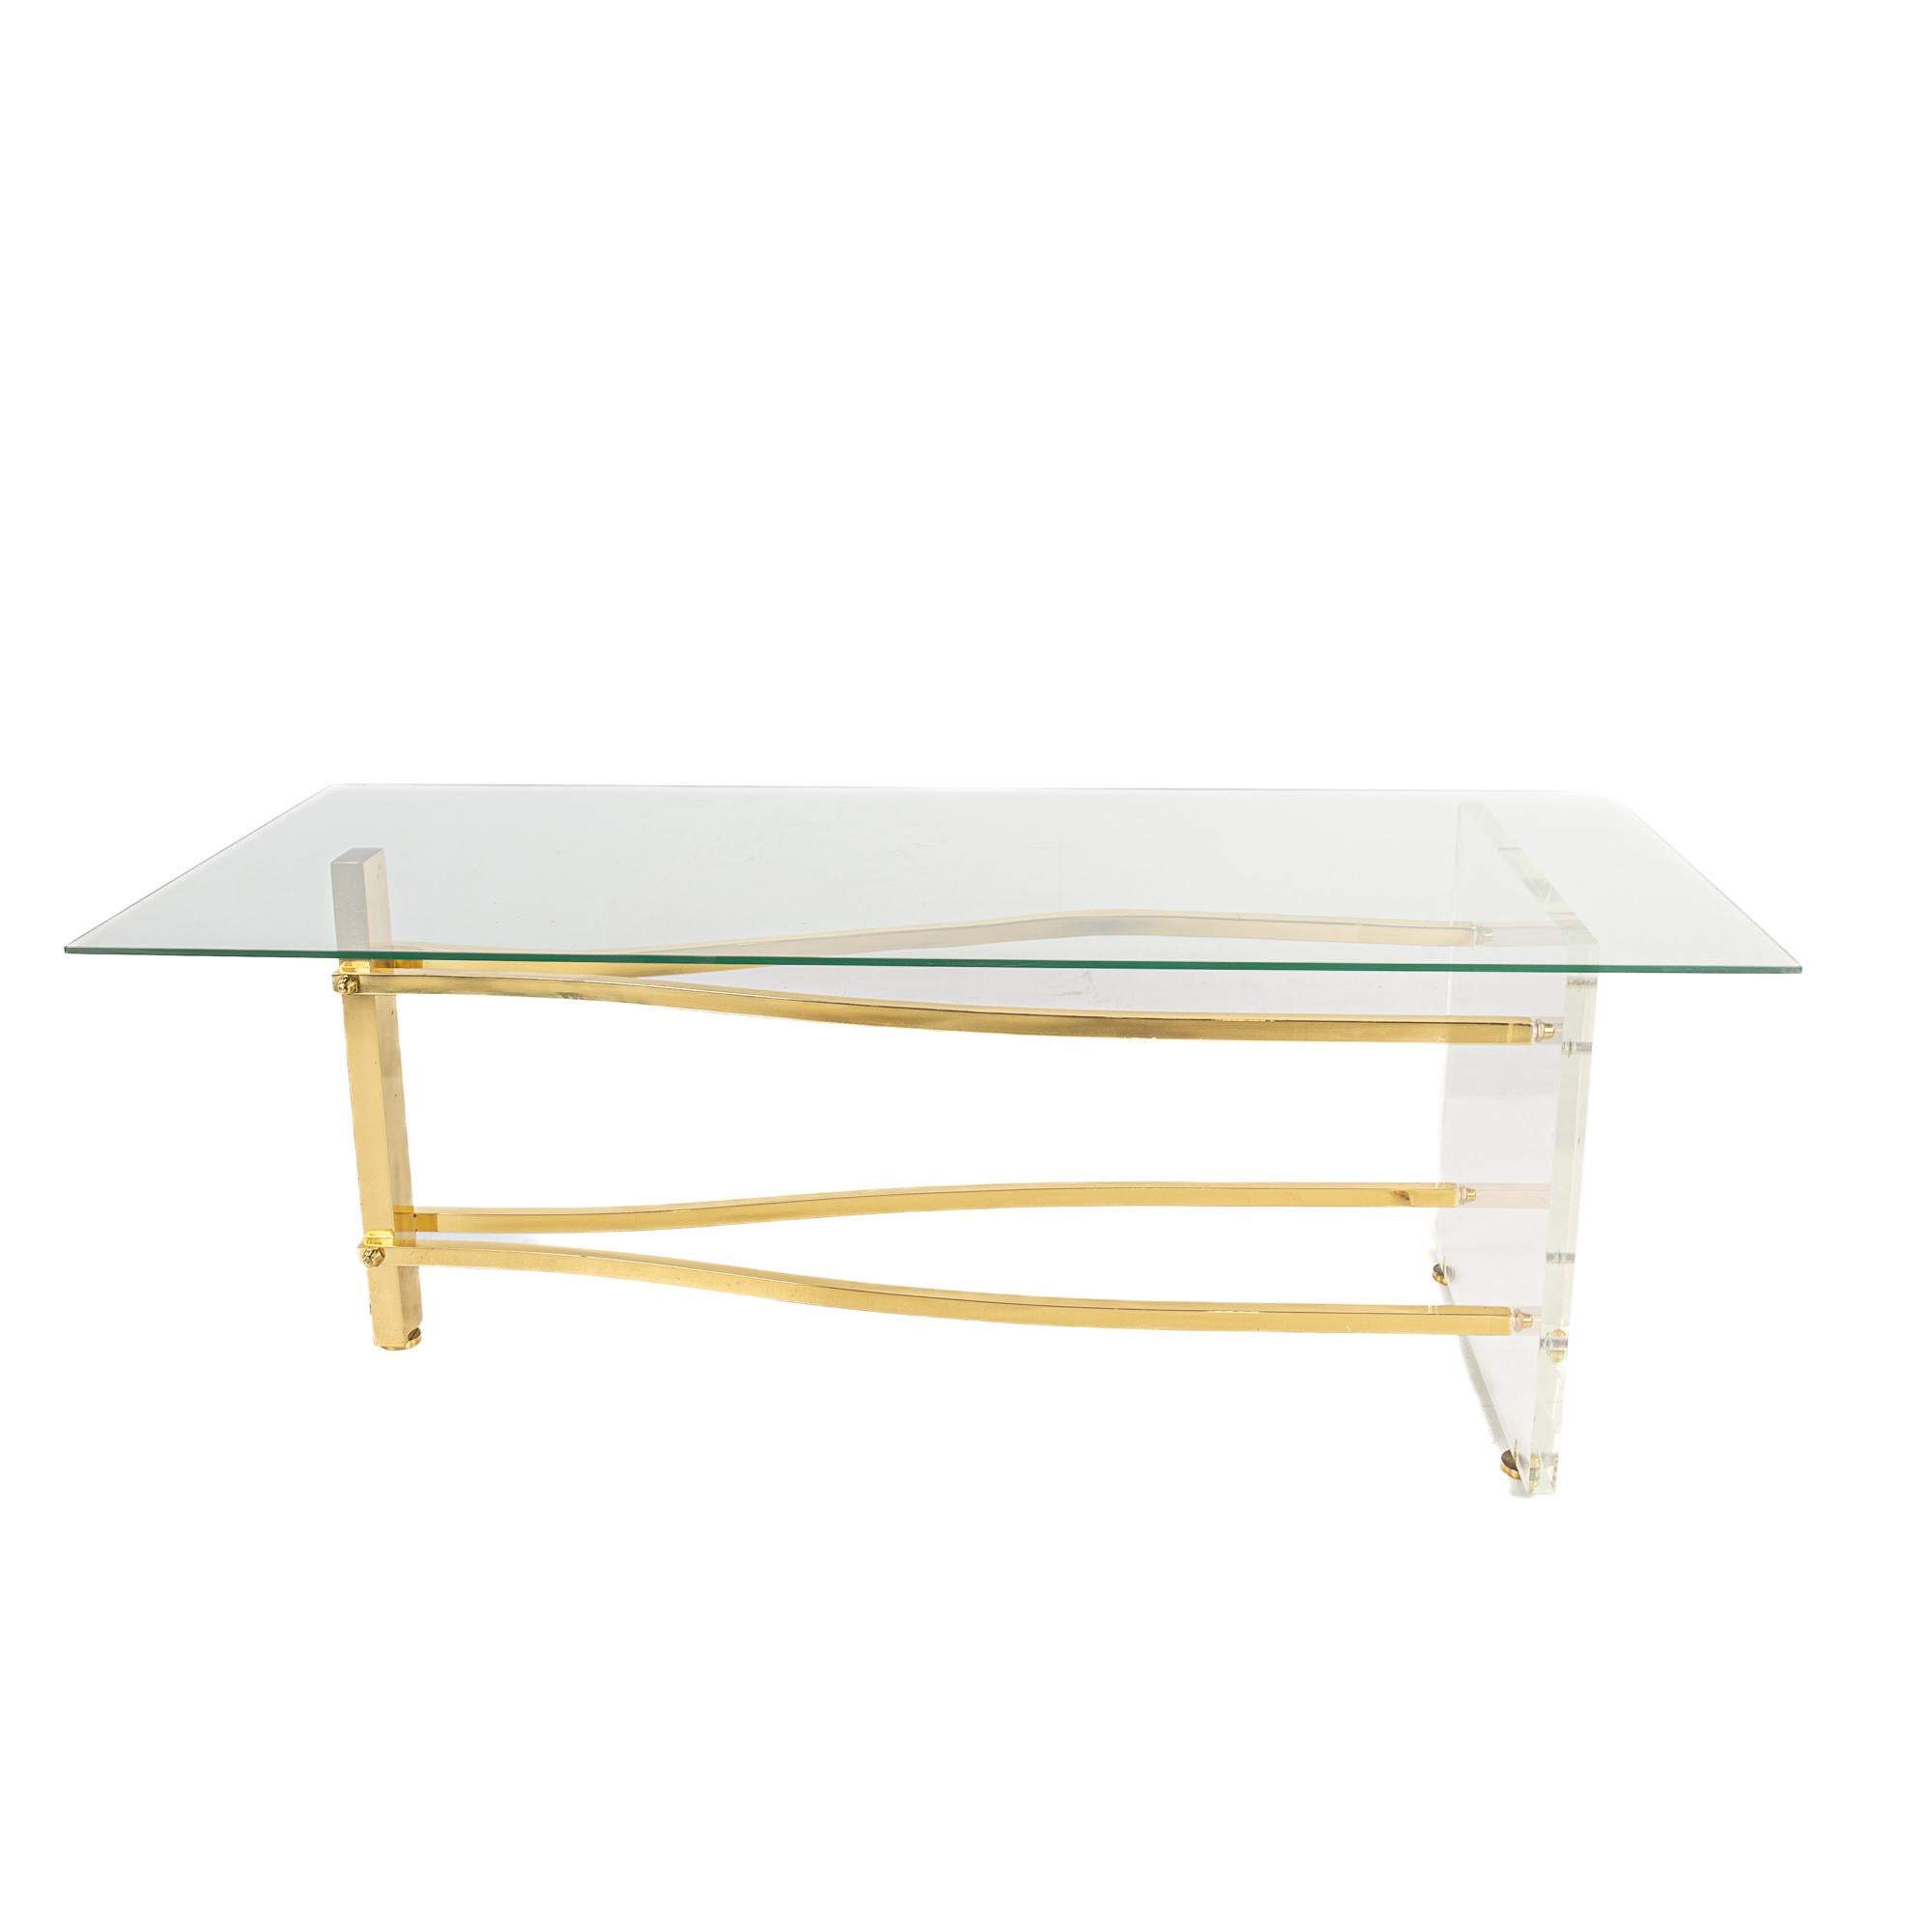 Mid Century Lucite and Brass Waterfall Table Base

 The table measures: 34 wide x 16 deep x 15 inches wide

We take our photos in a controlled lighting studio to show as much detail as possible. We do not photoshop out blemishes. 

We keep you fully